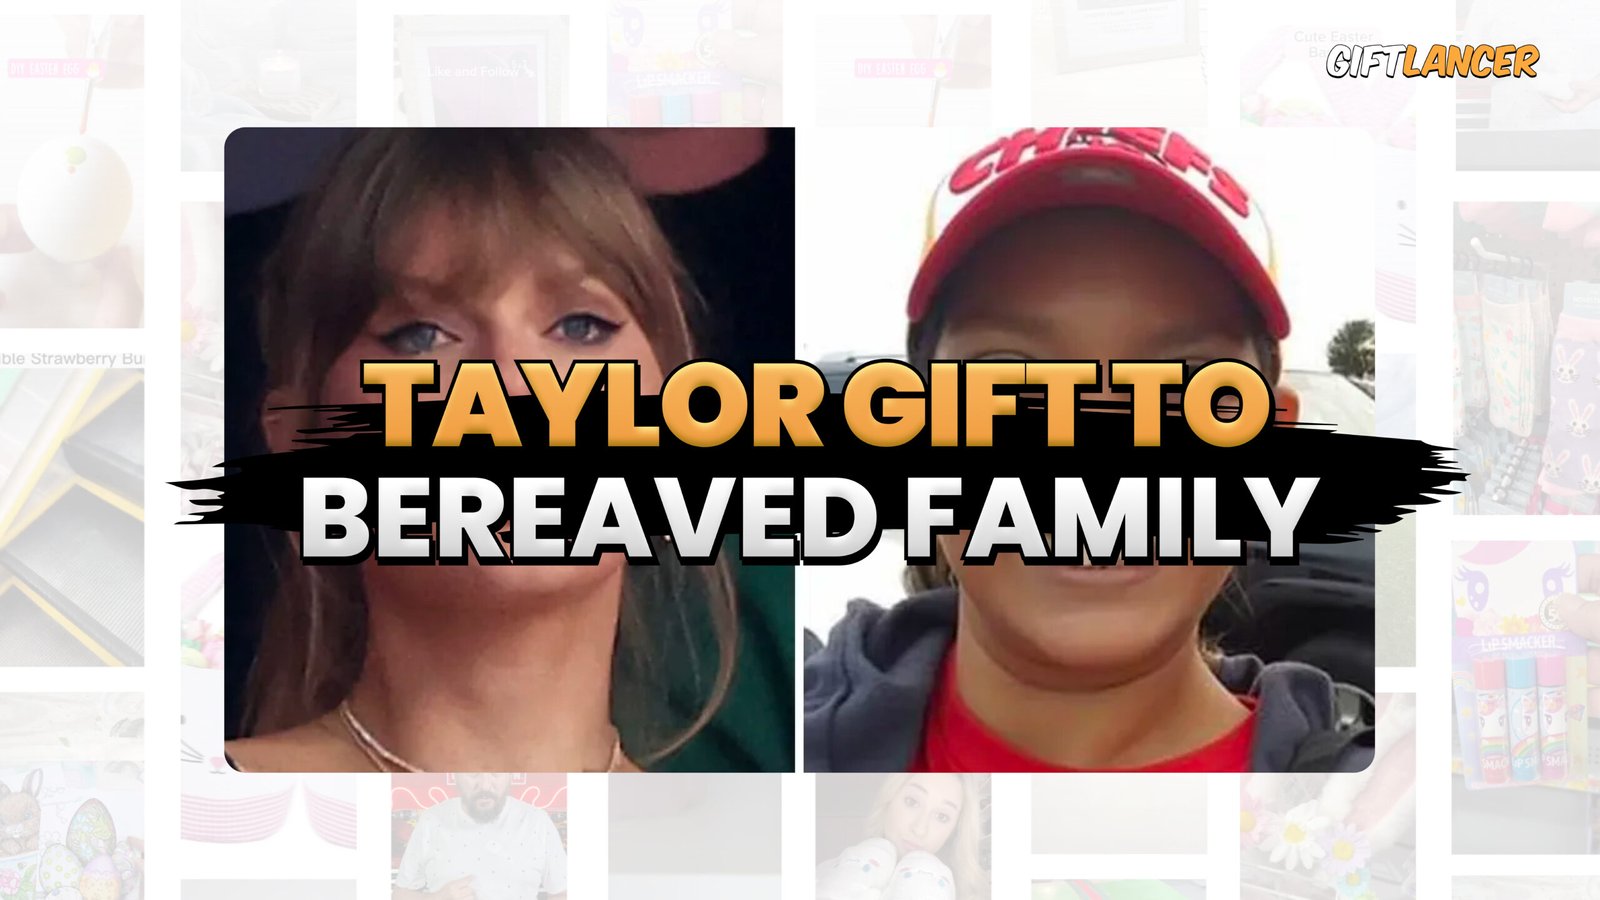 Taylor Swift donated $100,000 to the family of a woman who was fatally shot.